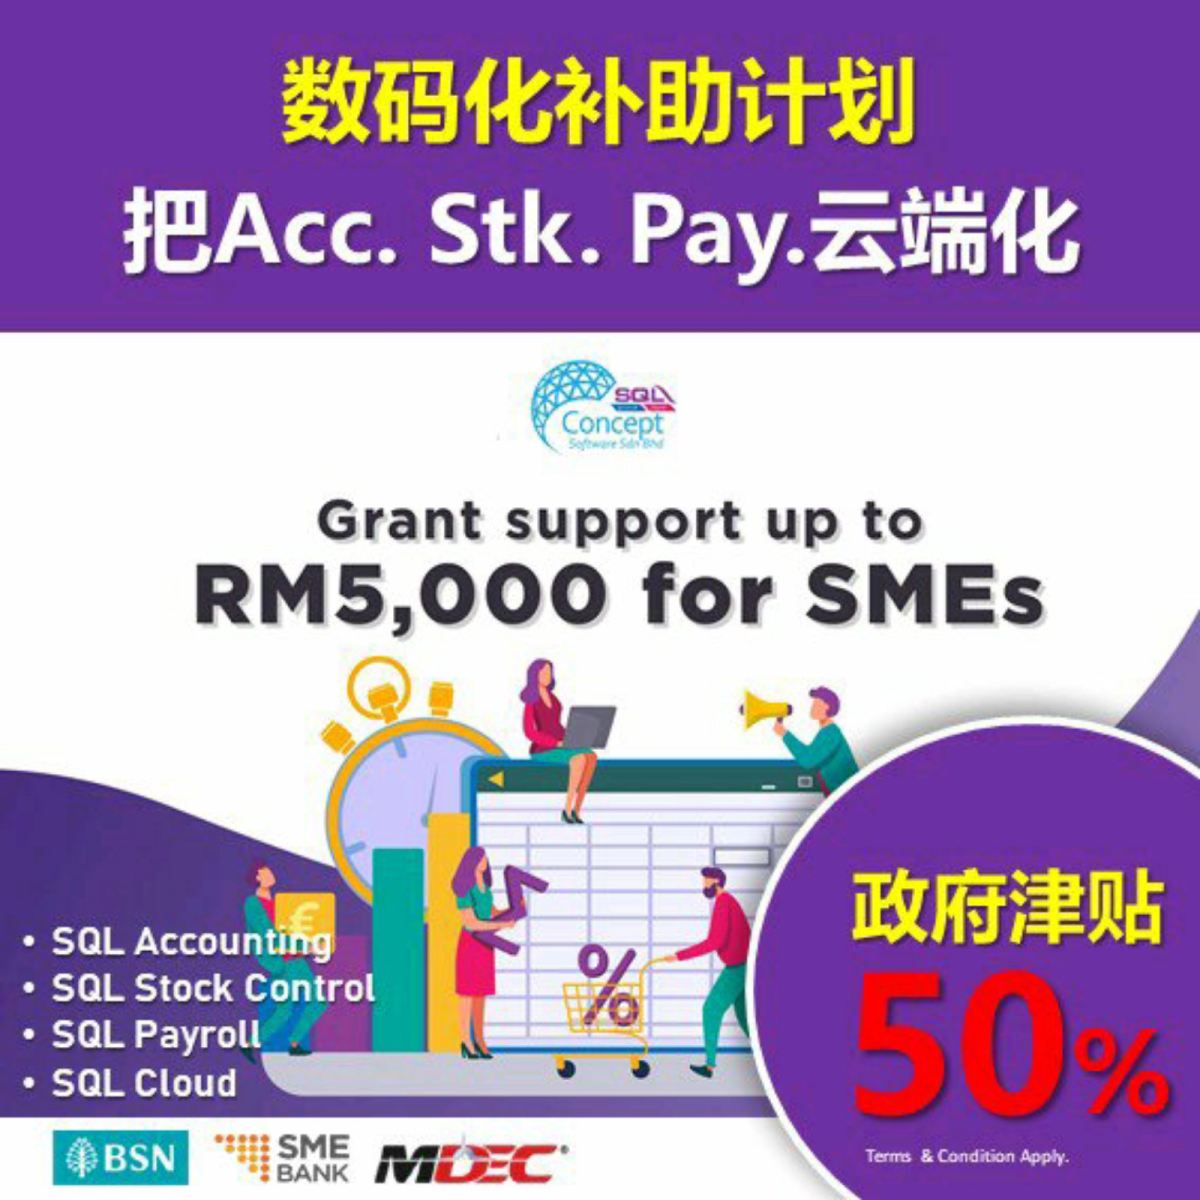 Support Malaysian SMEs in digital adoption under the SME Business Digitalisation Grant